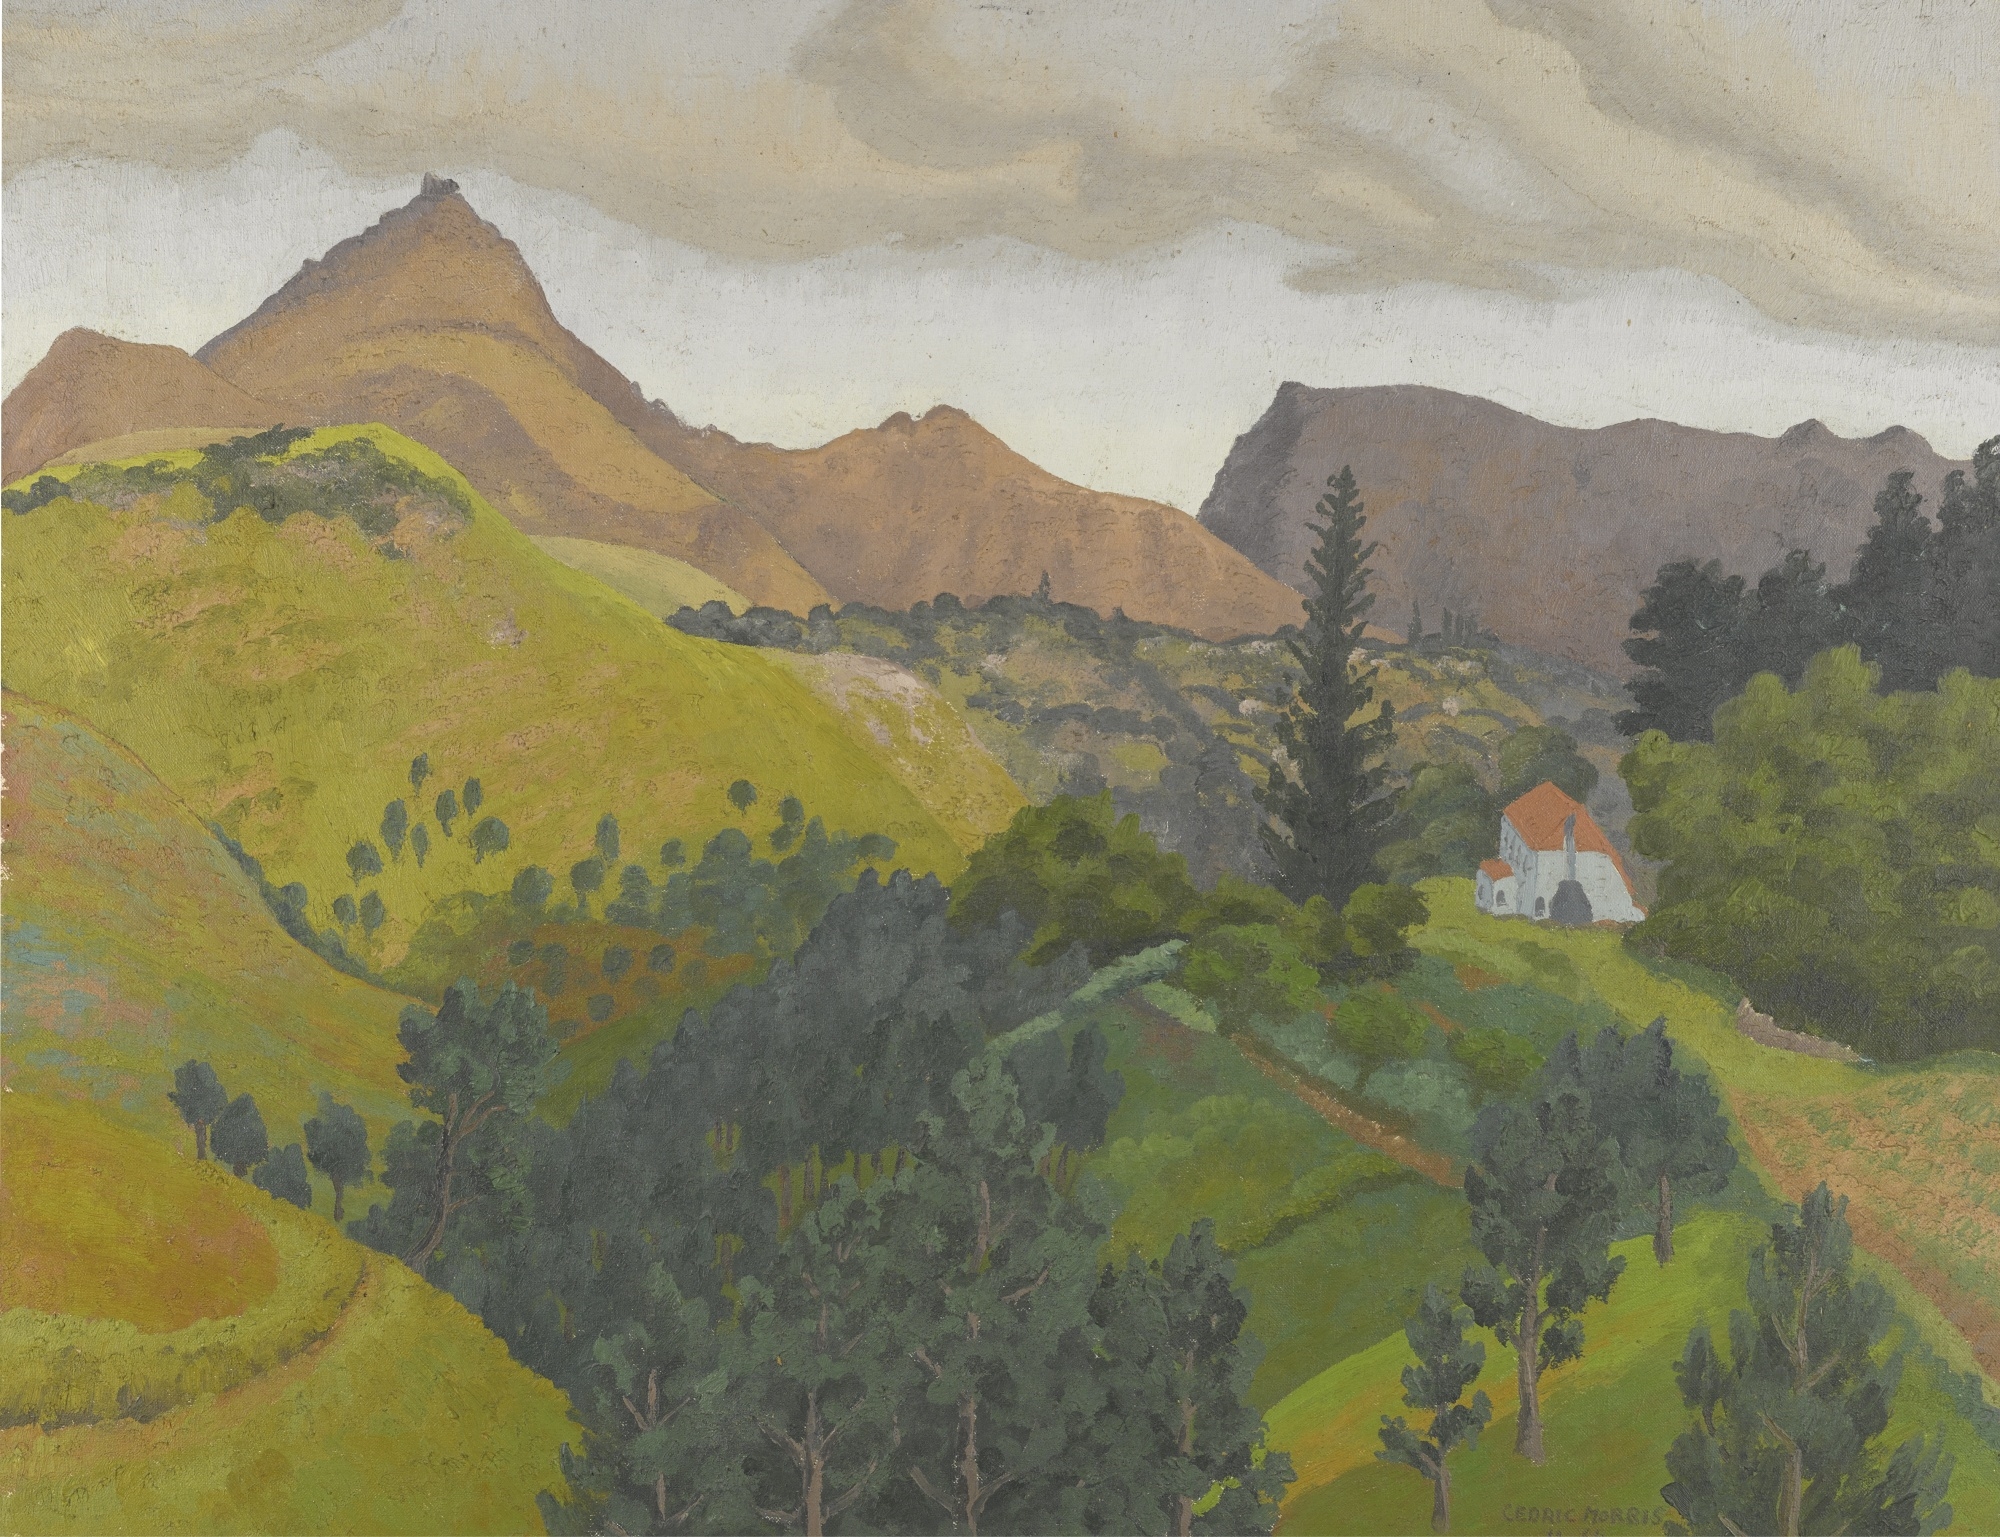 DISTANT VIEW OF NAPOLEON'S RESIDENCE ON ST. HELENA by Sir Cedric Morris, 1964